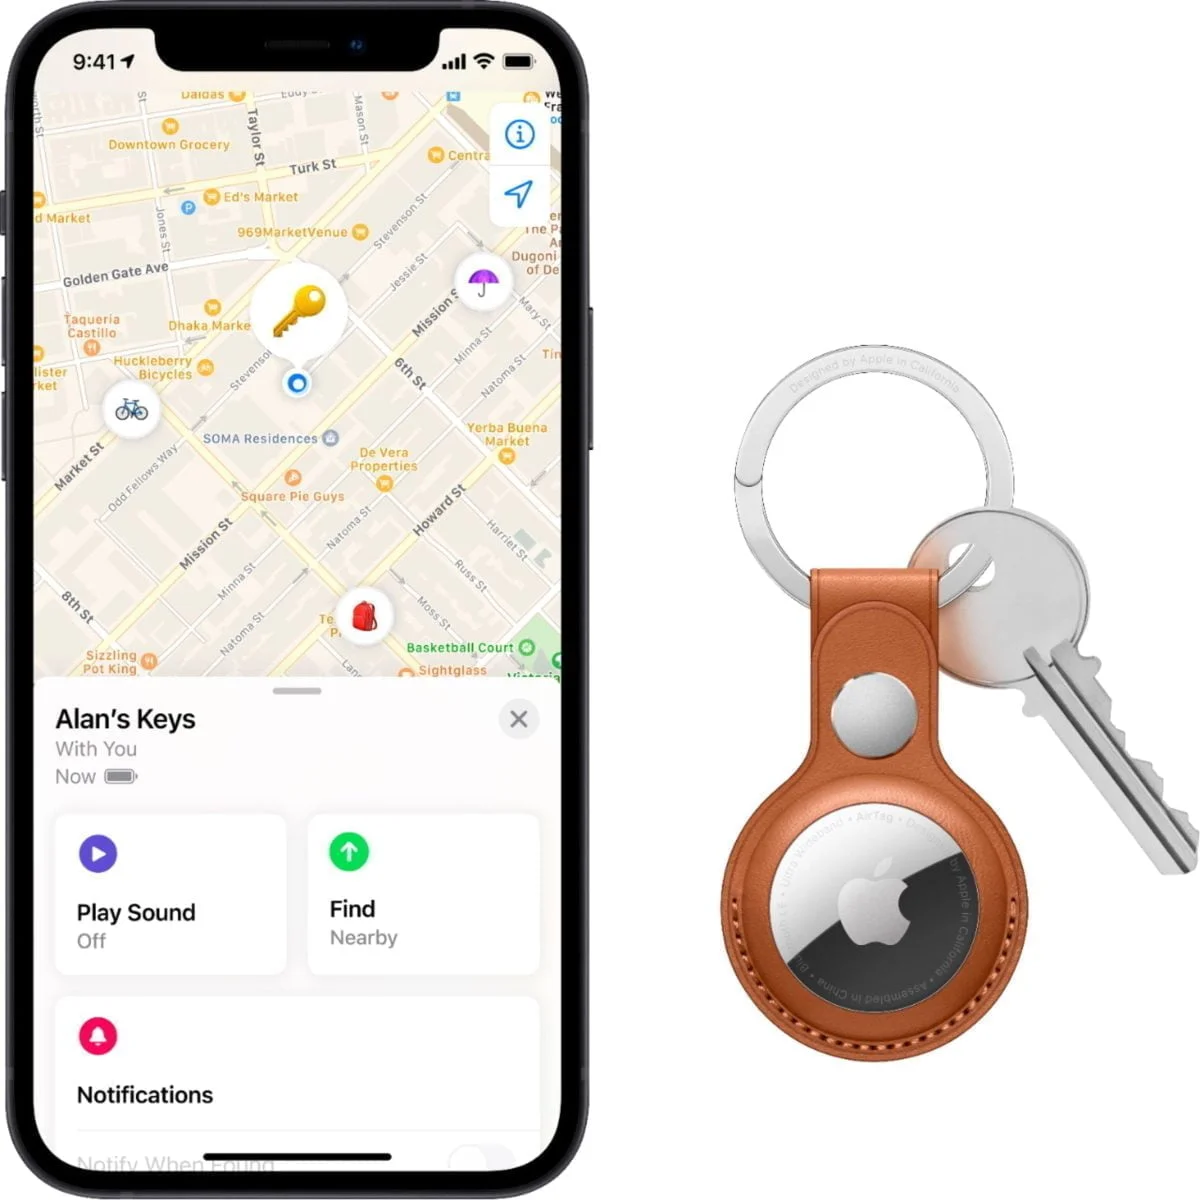 6461349Cv14D Scaled Apple &Lt;H1&Gt;Apple Airtag (4-Pack)&Lt;/H1&Gt; Airtag Is A Supereasy Way To Keep Track Of Your Stuff. Attach One To Your Keys, Slip Another In Your Backpack. And Just Like That, They’re On Your Radar In The Find My App, Where You Can Also Track Down Your Apple Devices And Keep Up With Friends And Family. Https://Youtu.be/Ckqvg0Rj35I Apple Airtag Apple Airtag 4 Pack